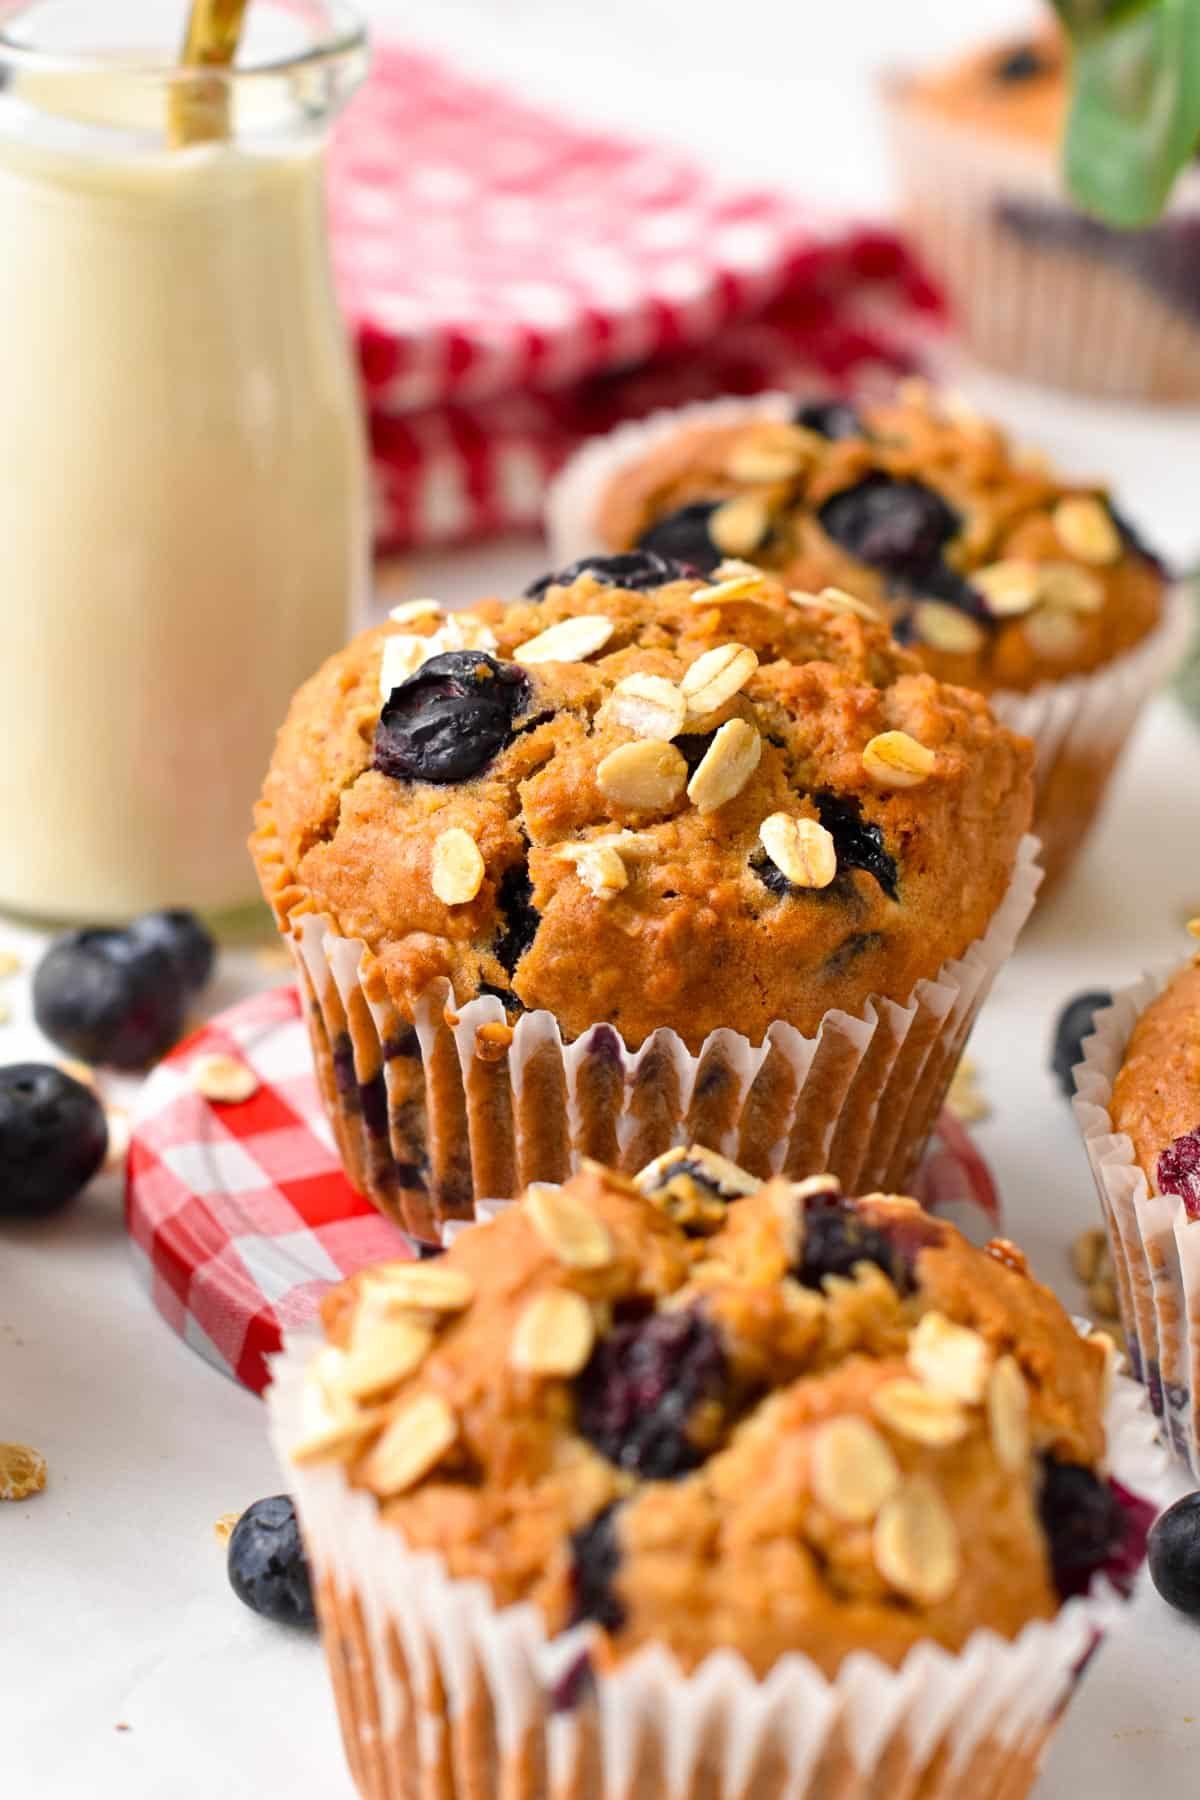 Vegan oatmeal muffins with blueberries and oats on top and placed on red and white round lid.